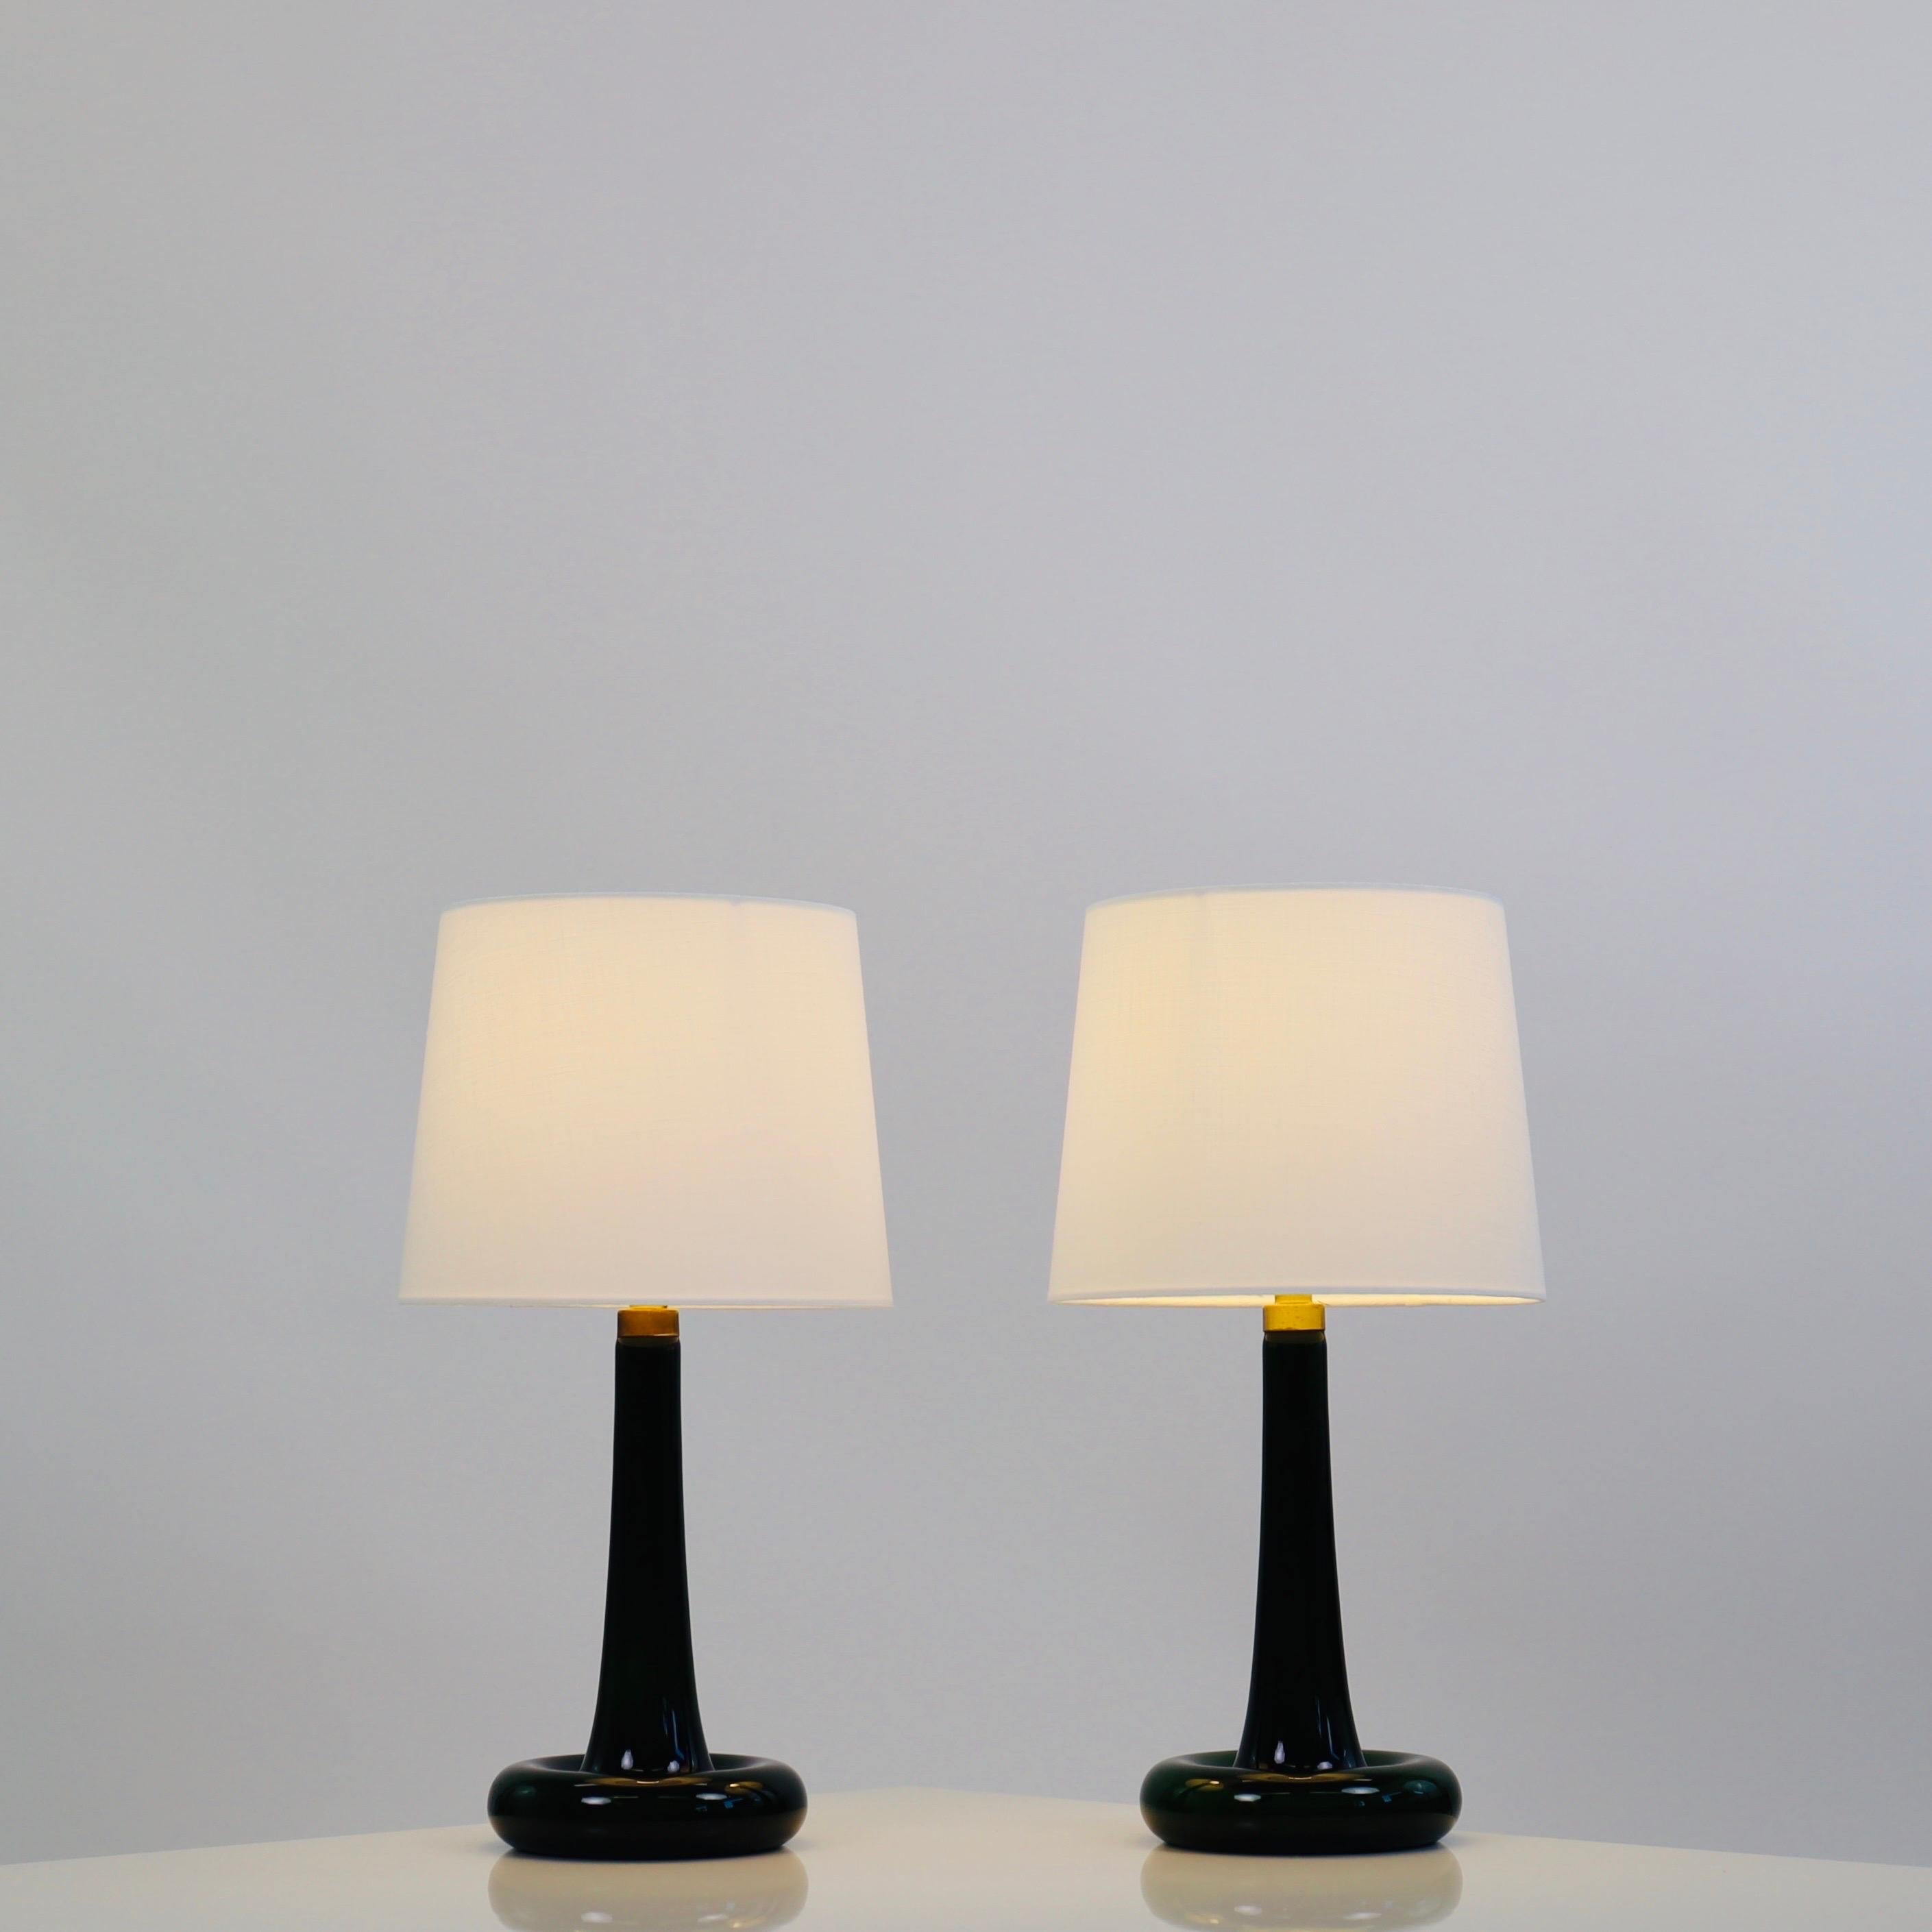 Set of Green Glass Desk Lamps by Michael Bang for Holmegaard, 1970s, Denmark For Sale 8